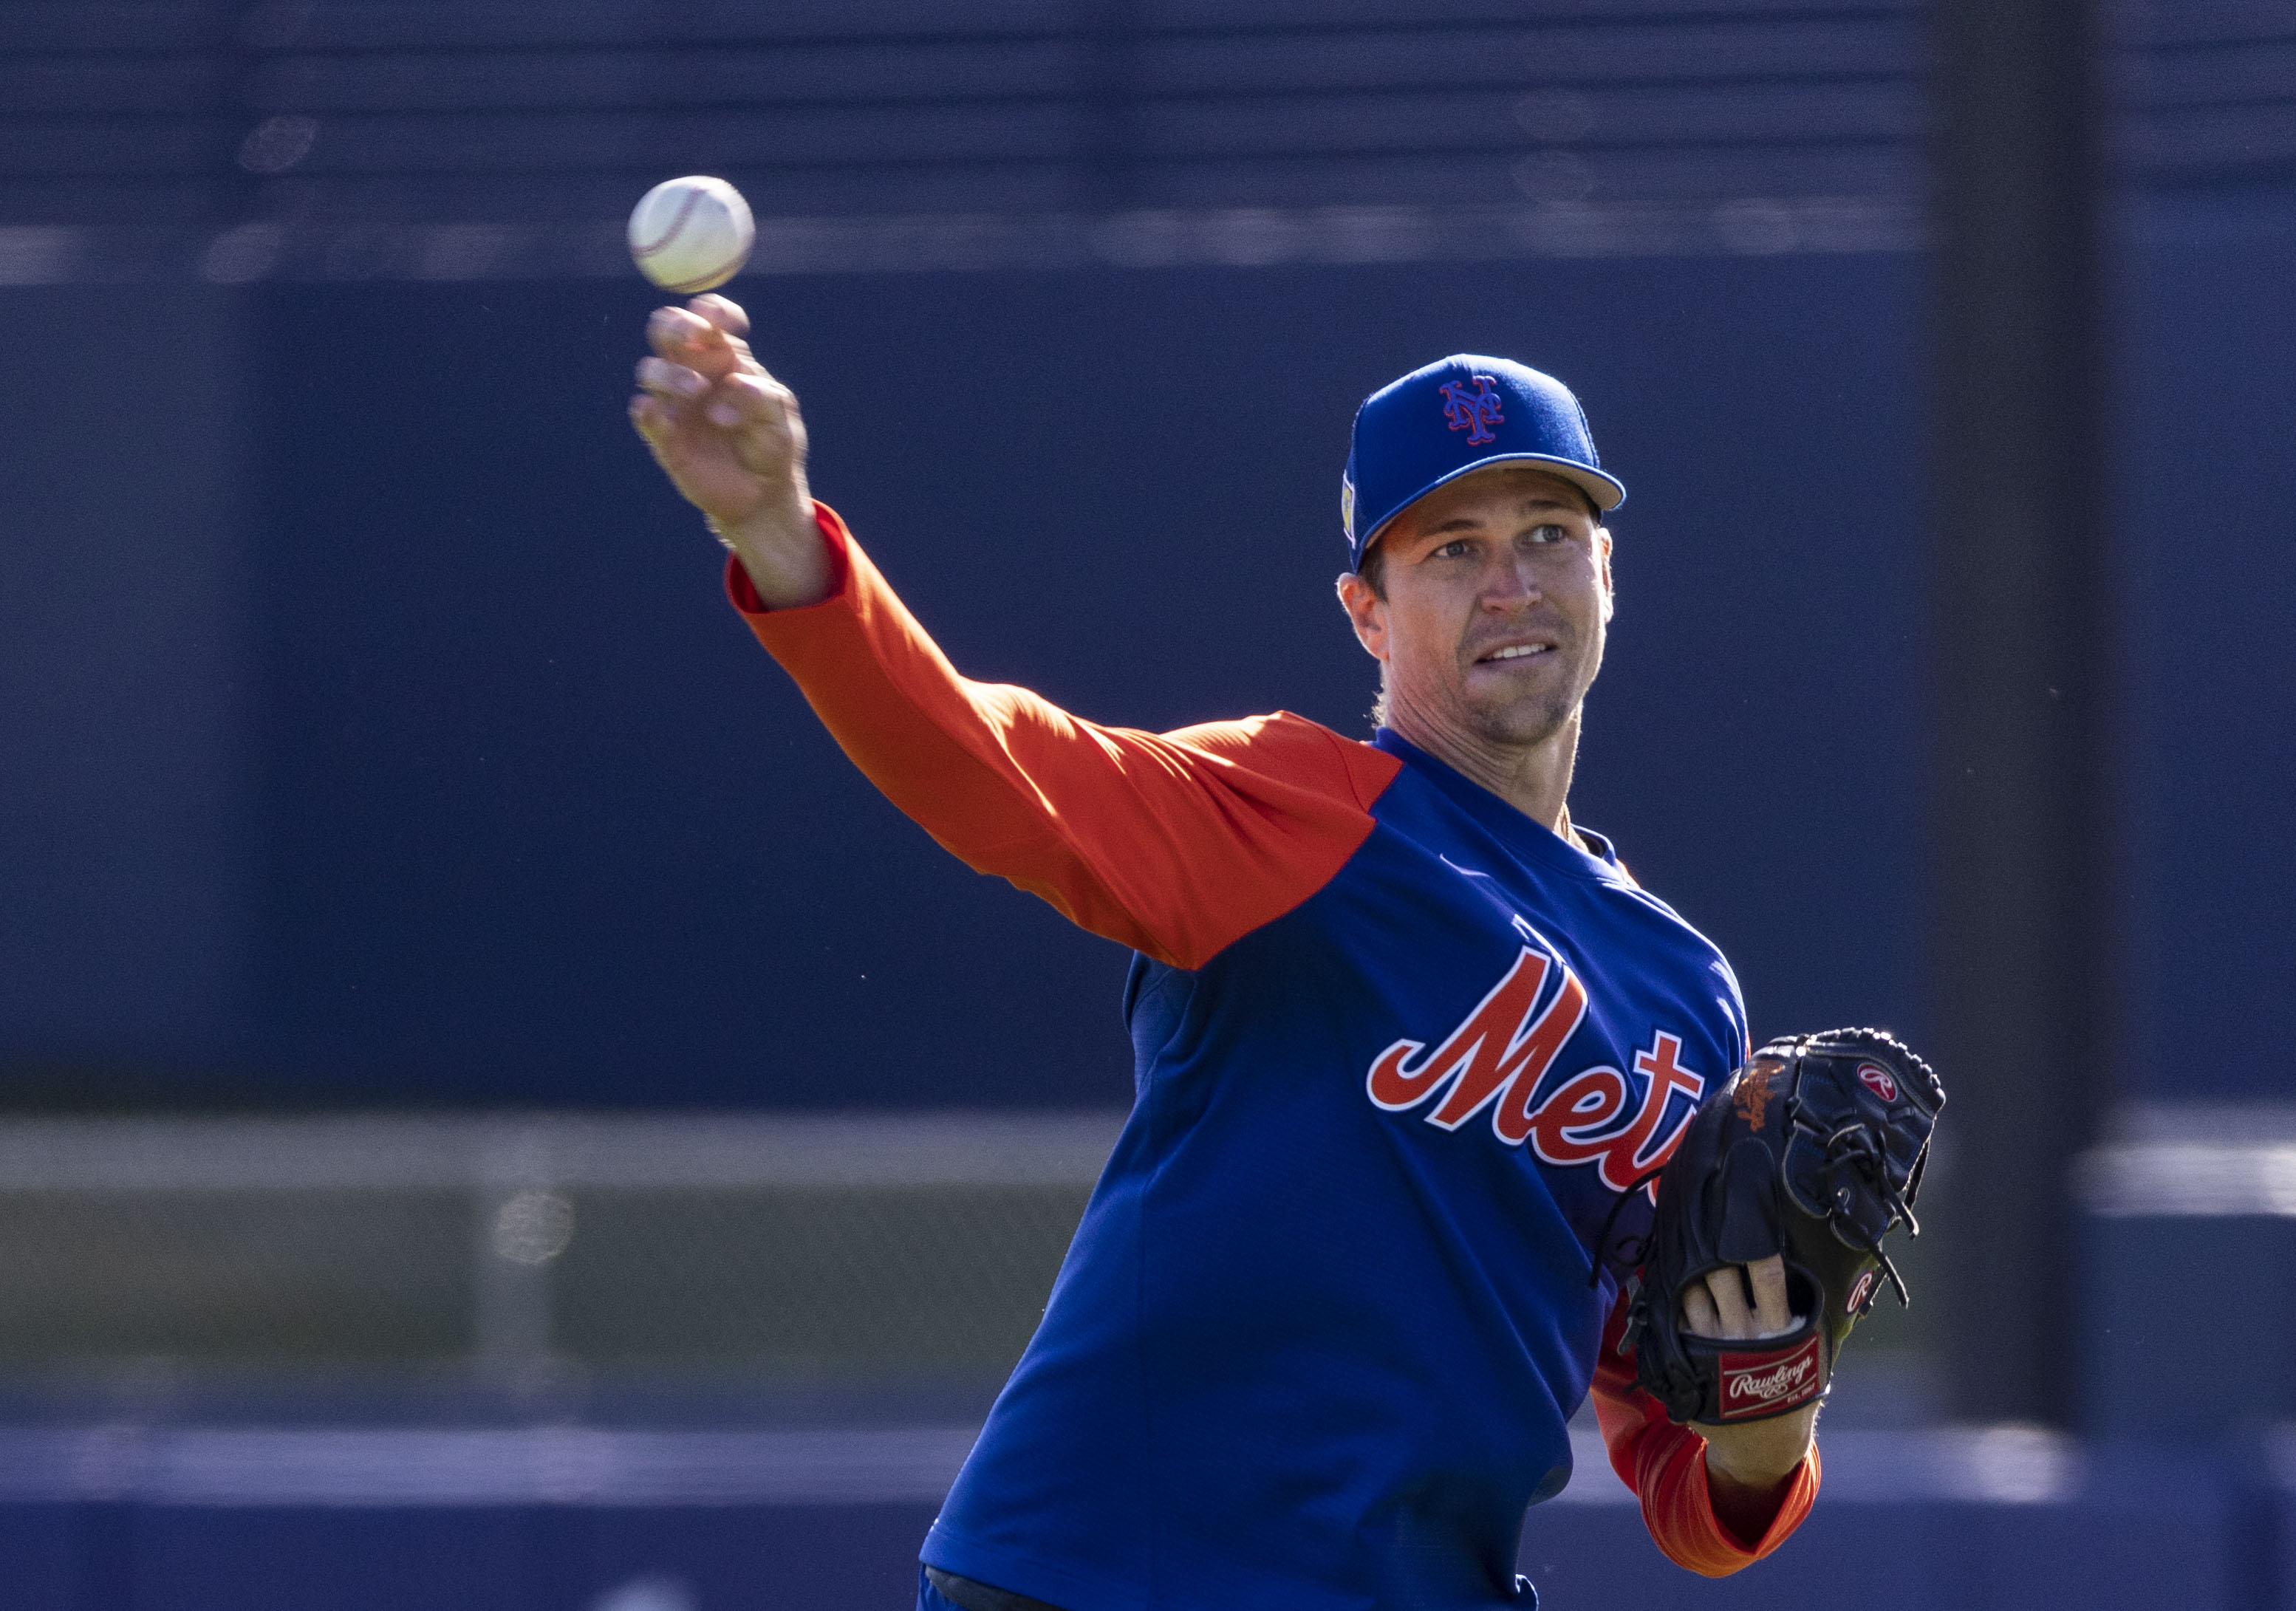 Jacob deGrom shoulder injury update: Will he pitch for Mets Monday?